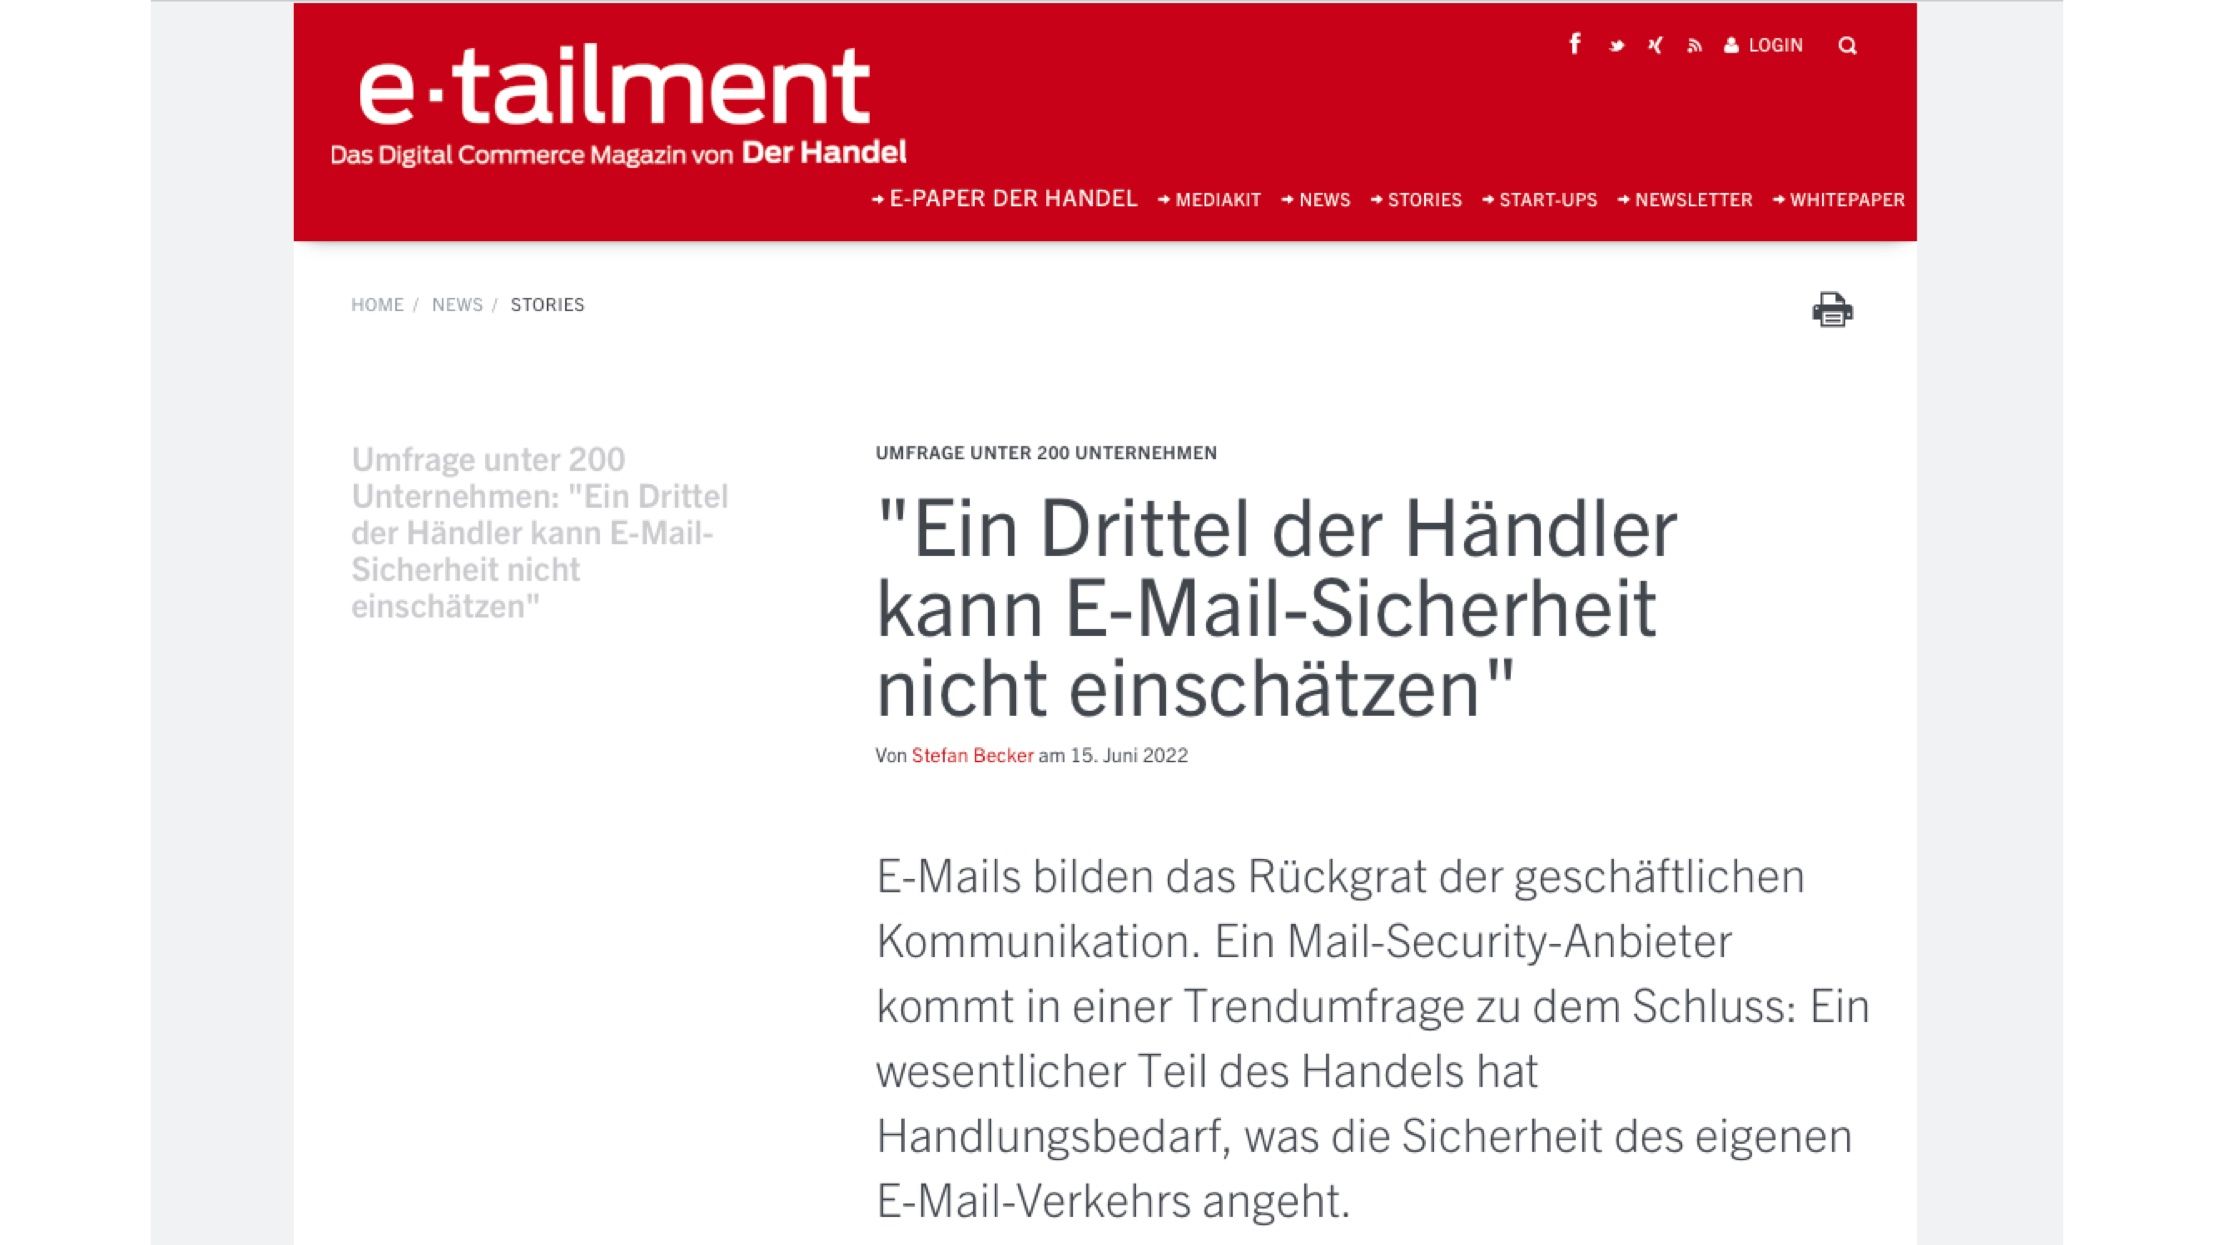 Artikel ""One-third of retailers can't assess email security"" in der e-tailment